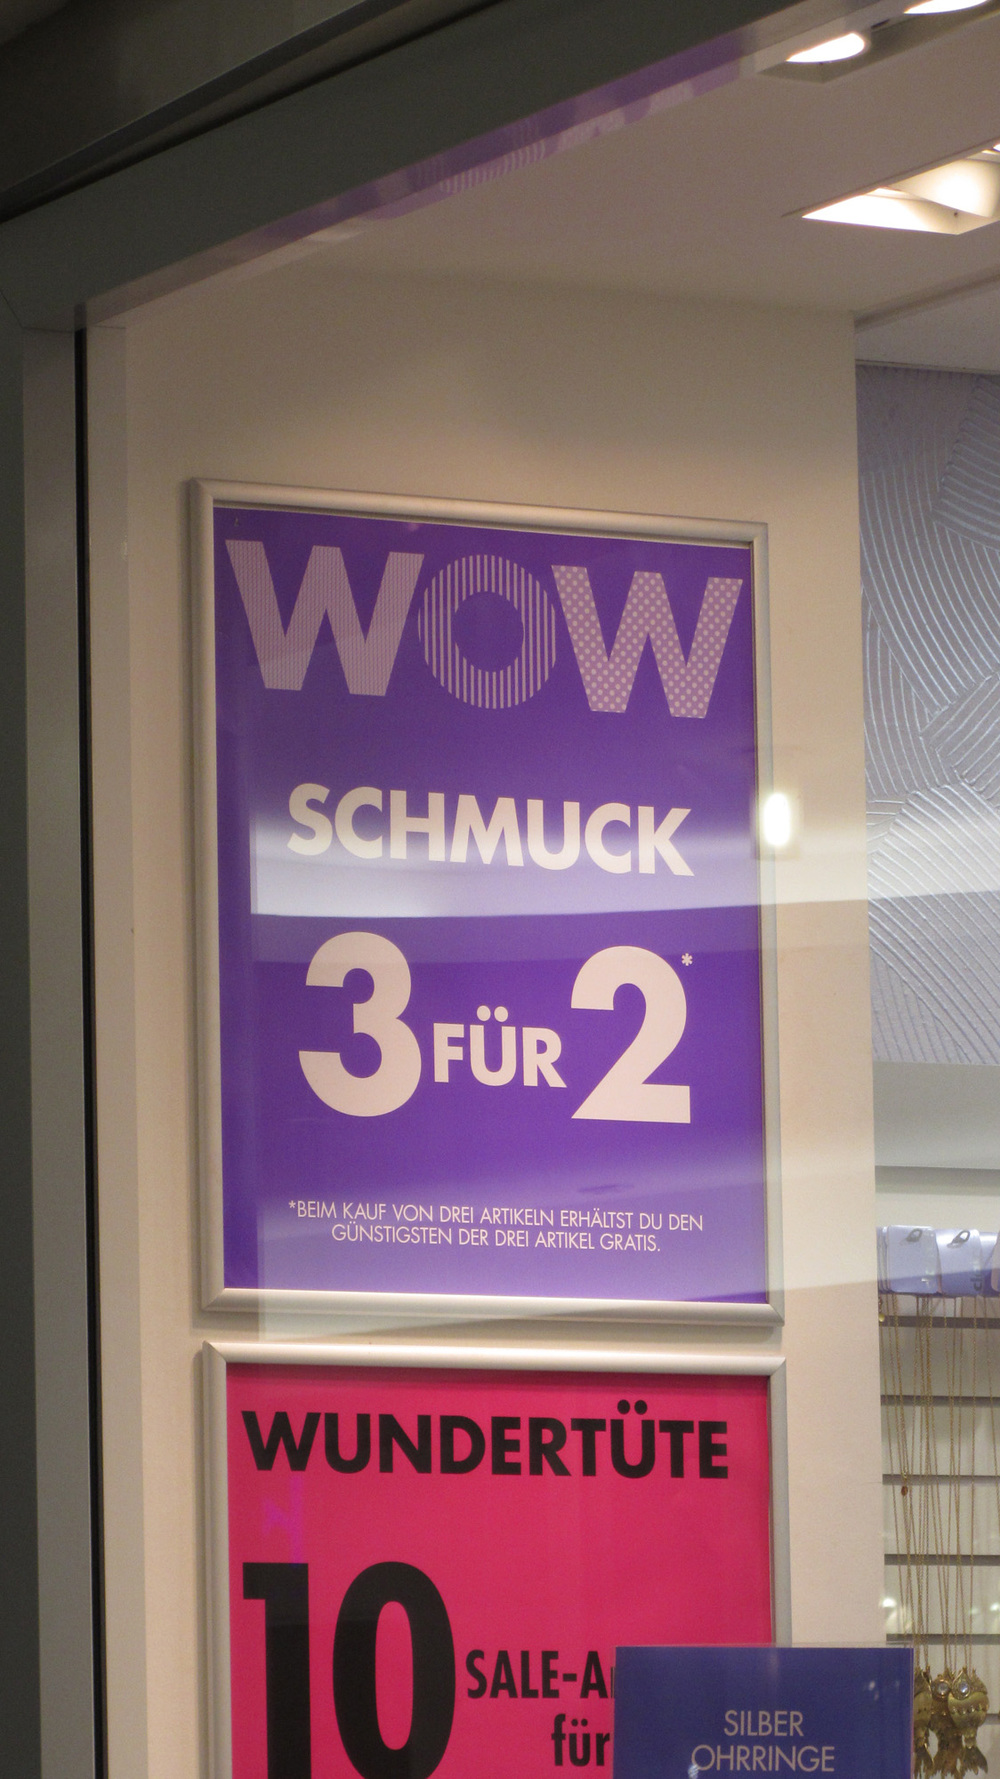  ​I thought schmuck was funny and then I saw 'Wondertute' which is even better! 